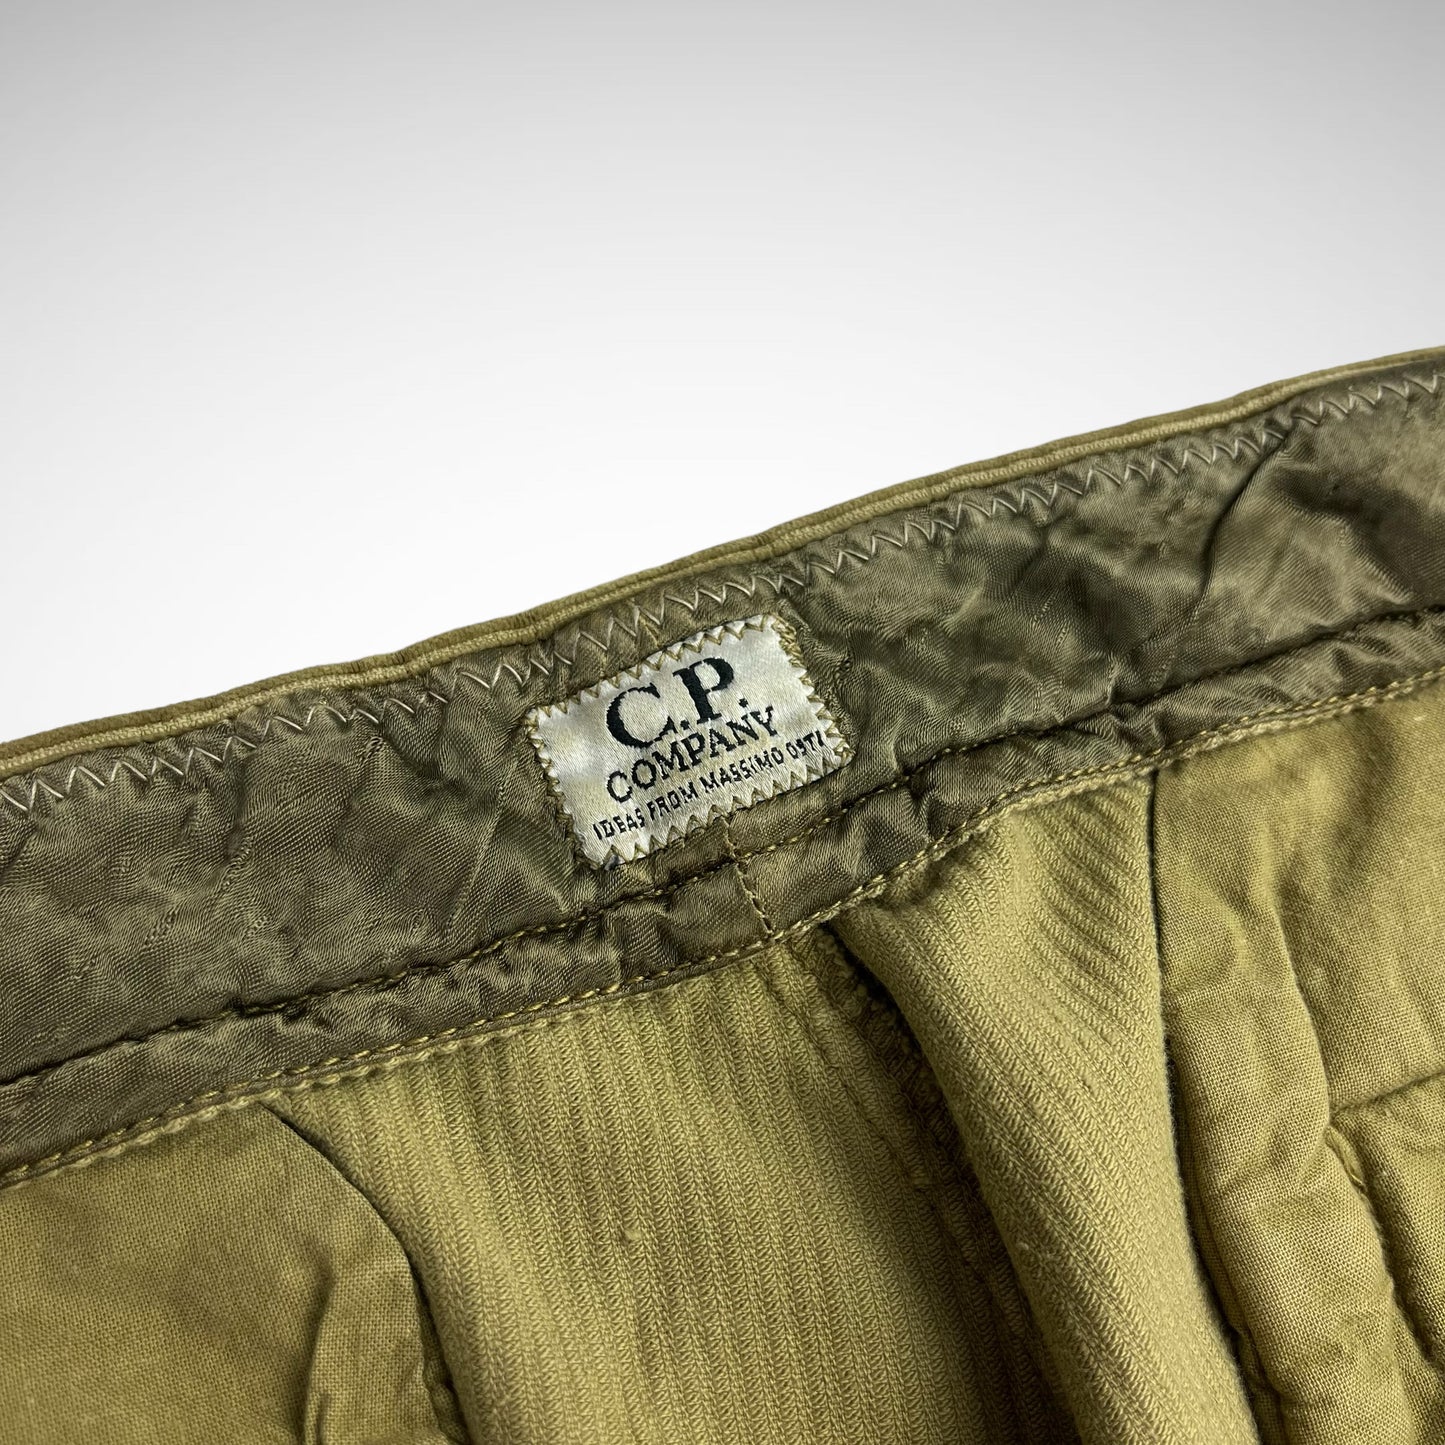 CP Company ‘Ideas by Massimo Osti’ Corduroy Trousers (1980s)